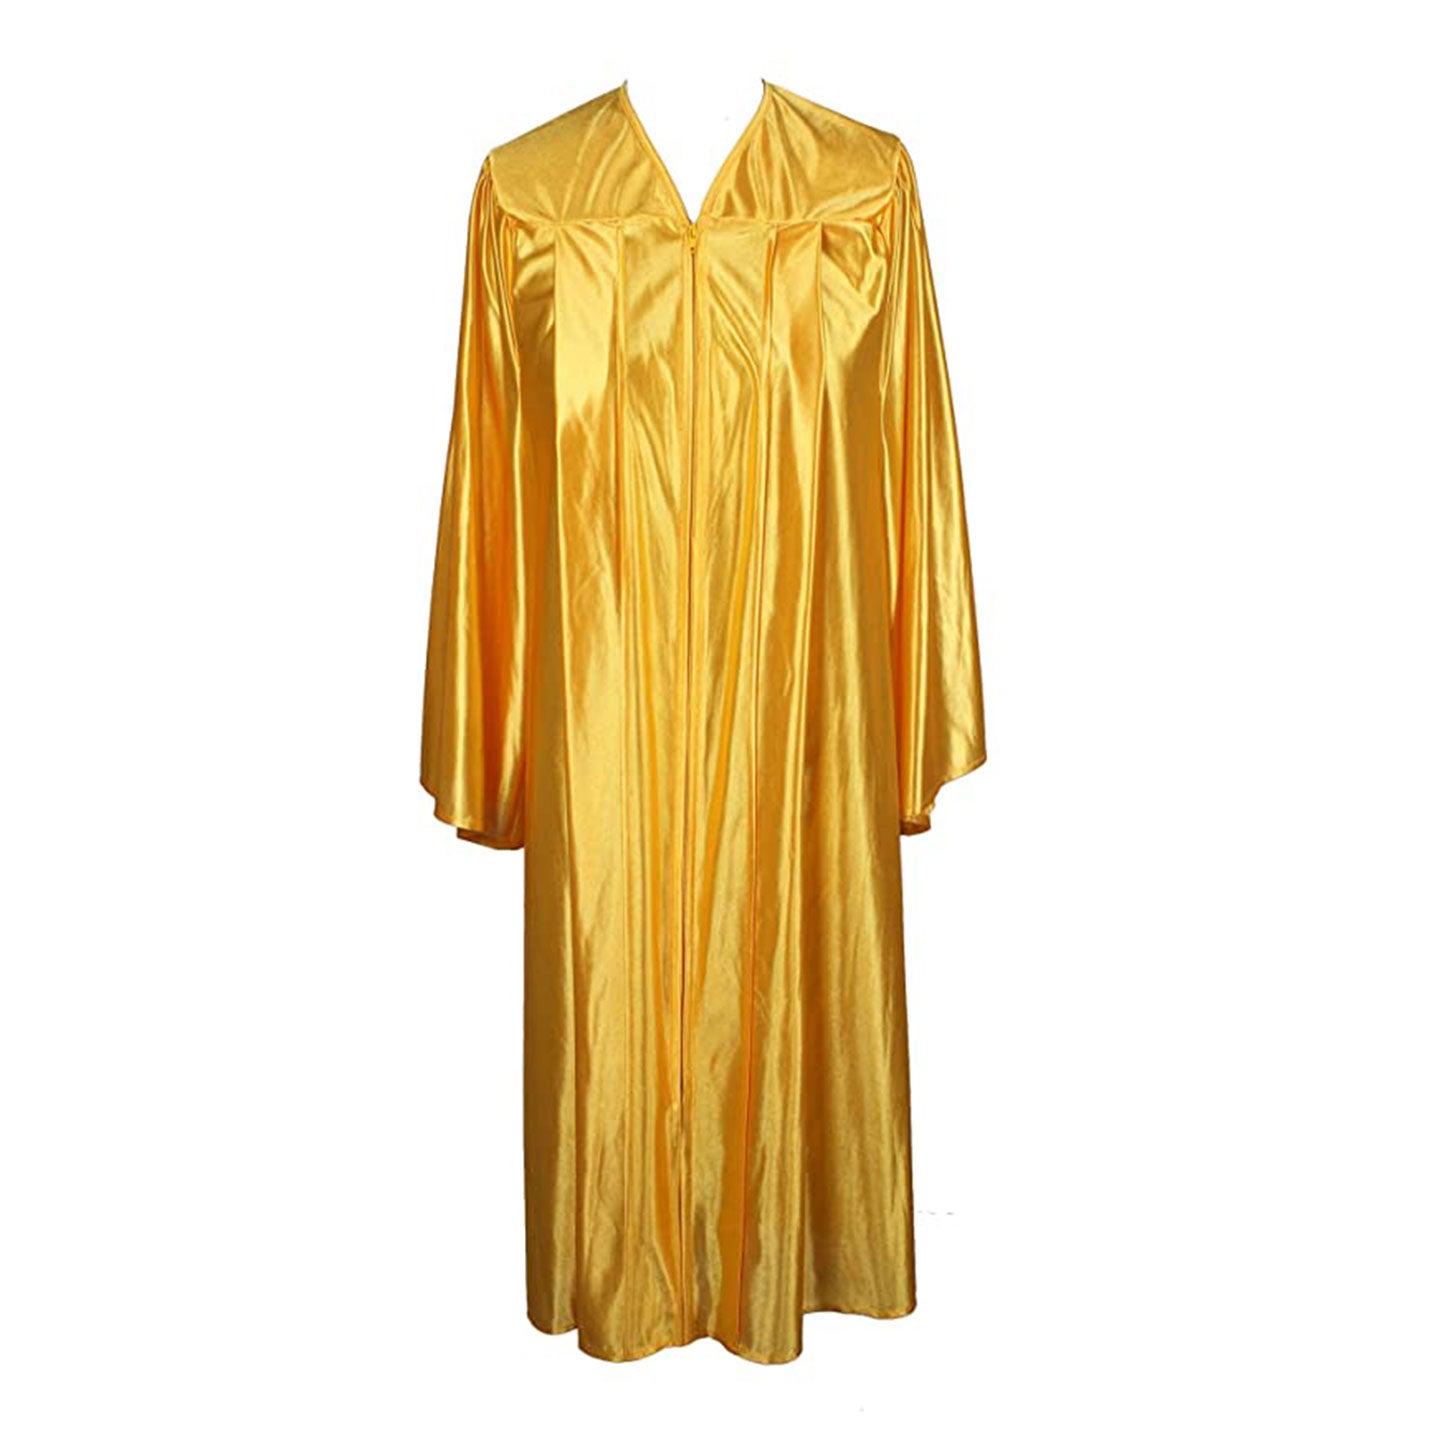 Shiny Gold Graduation Gown